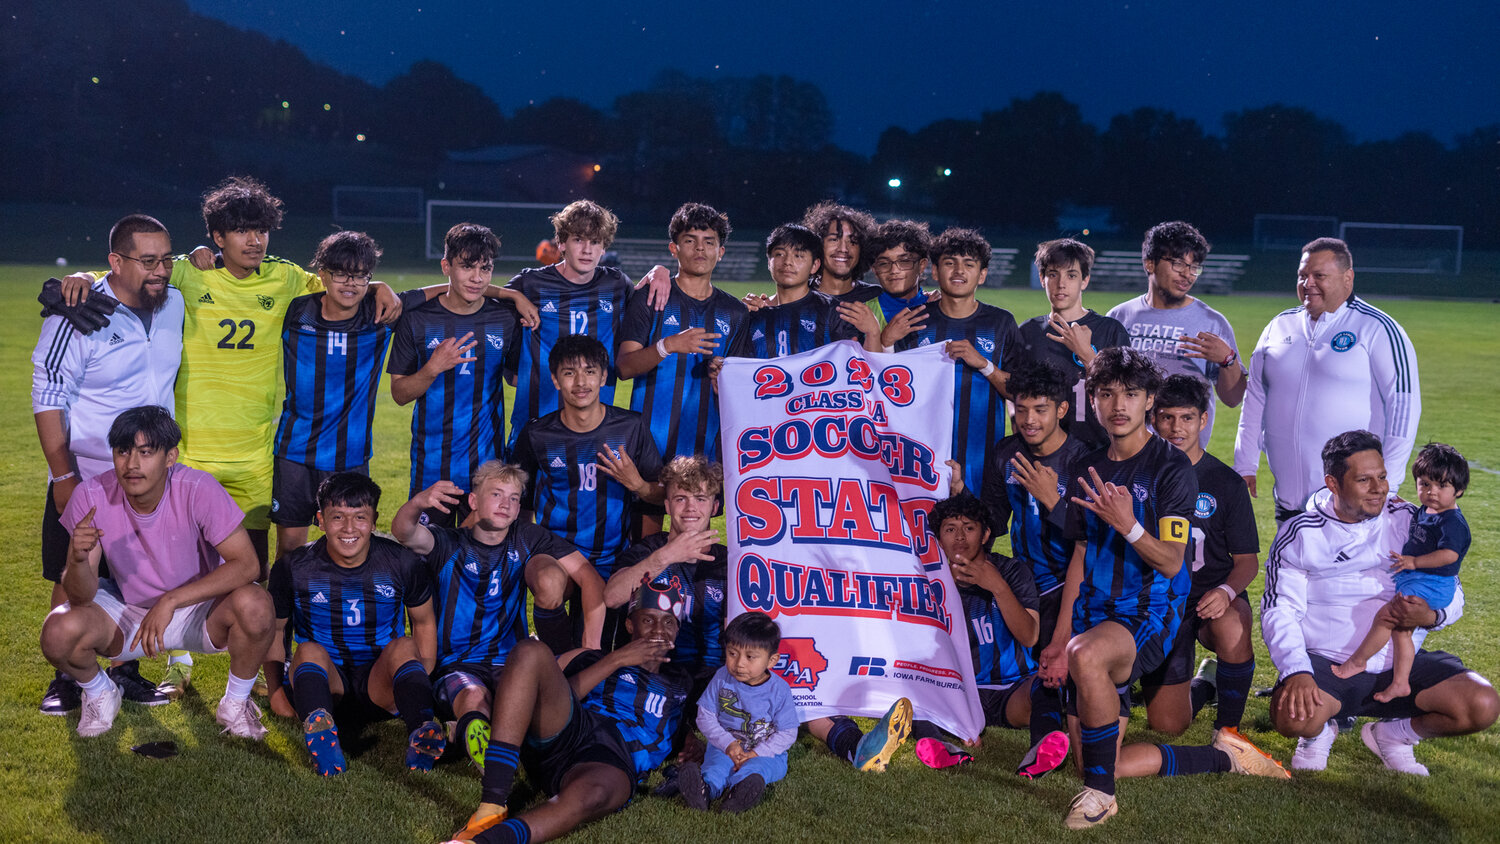 The Comets  players and coaches pose with their 2023 class 1A banner after their state qualifying soccer game last week.